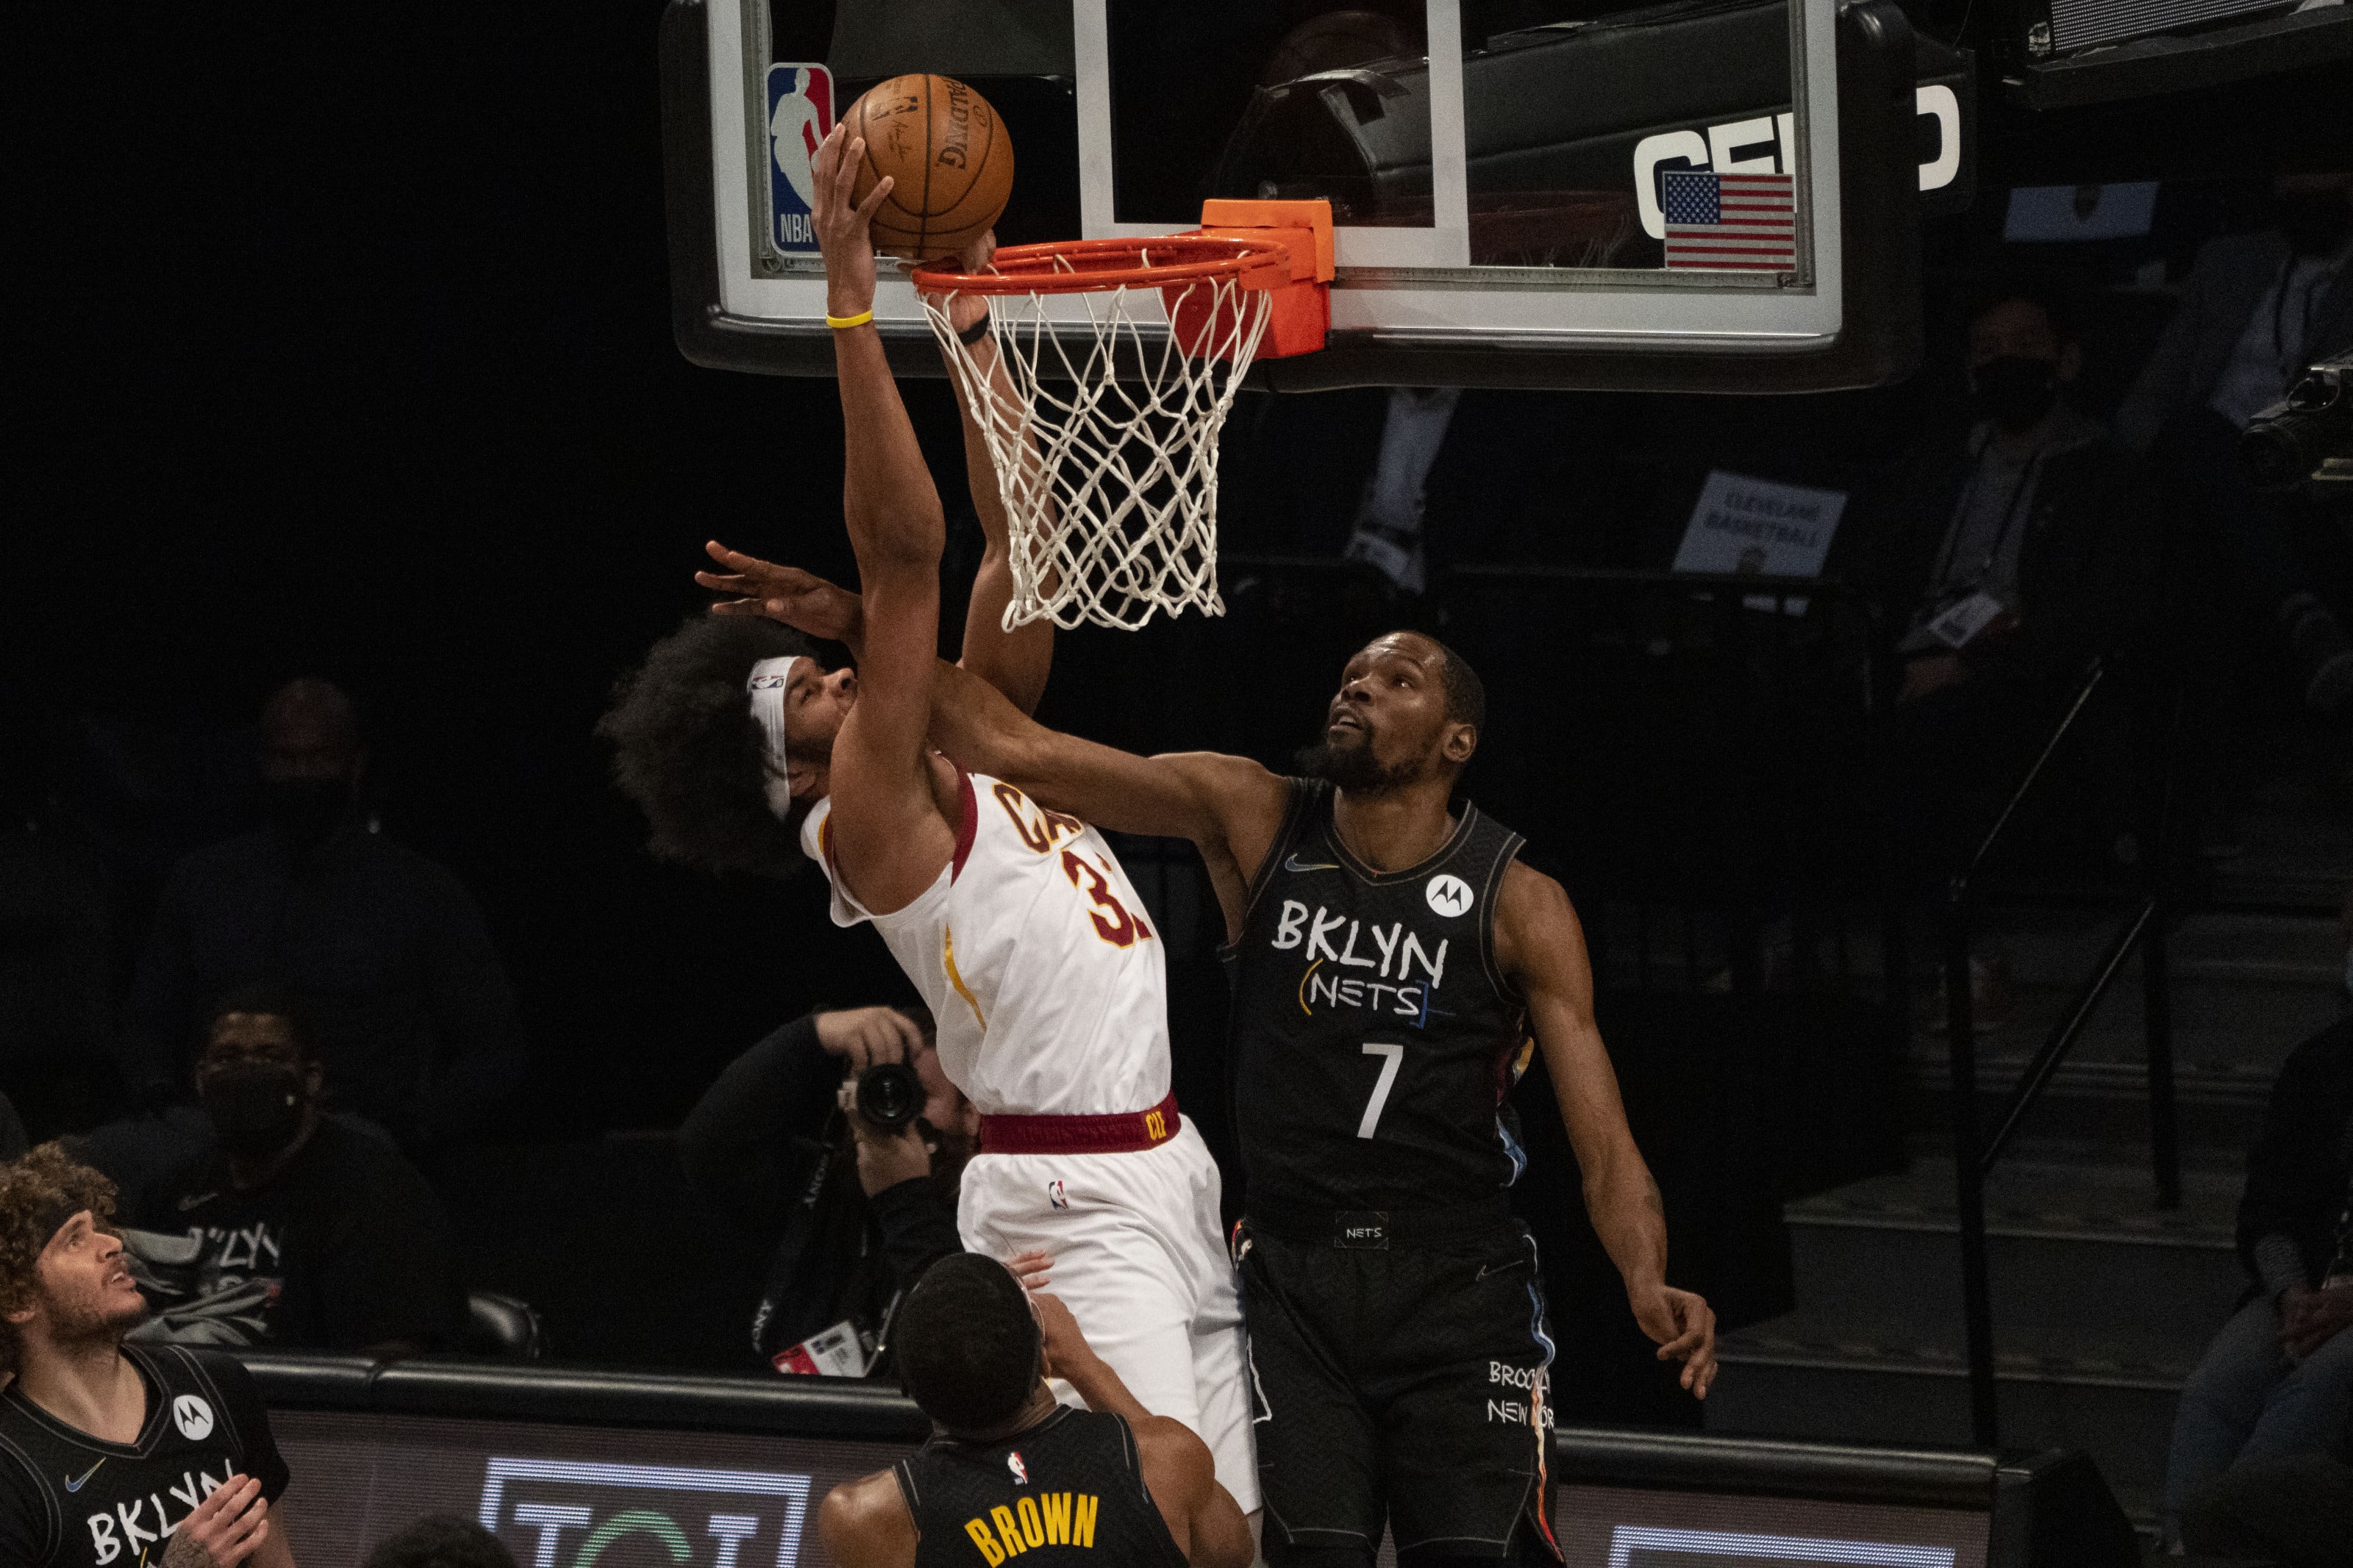 John Collins dunk on Jarrett Allen might be dunk of the year